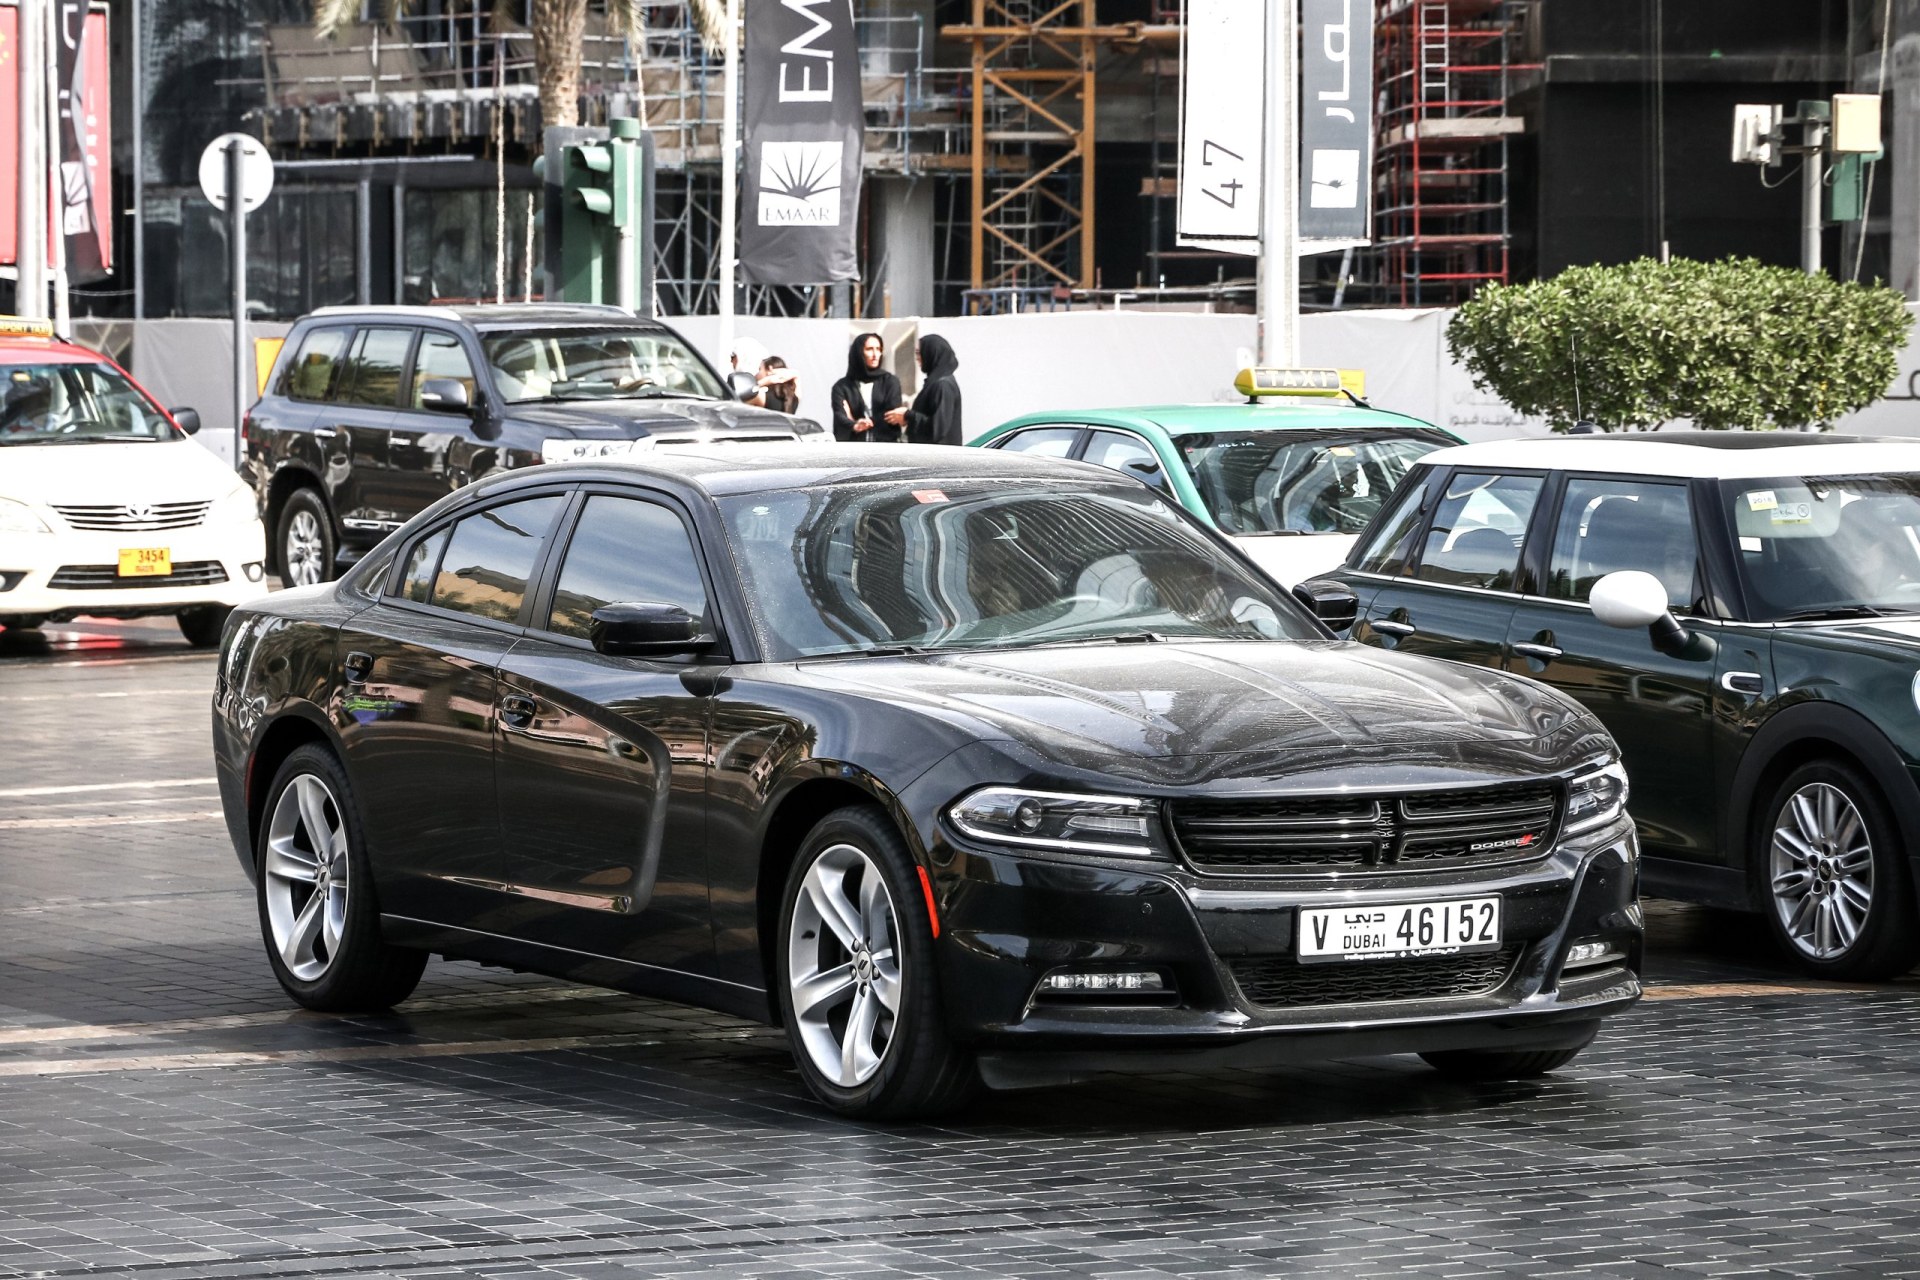 2015 Dodge Charger in the city street.